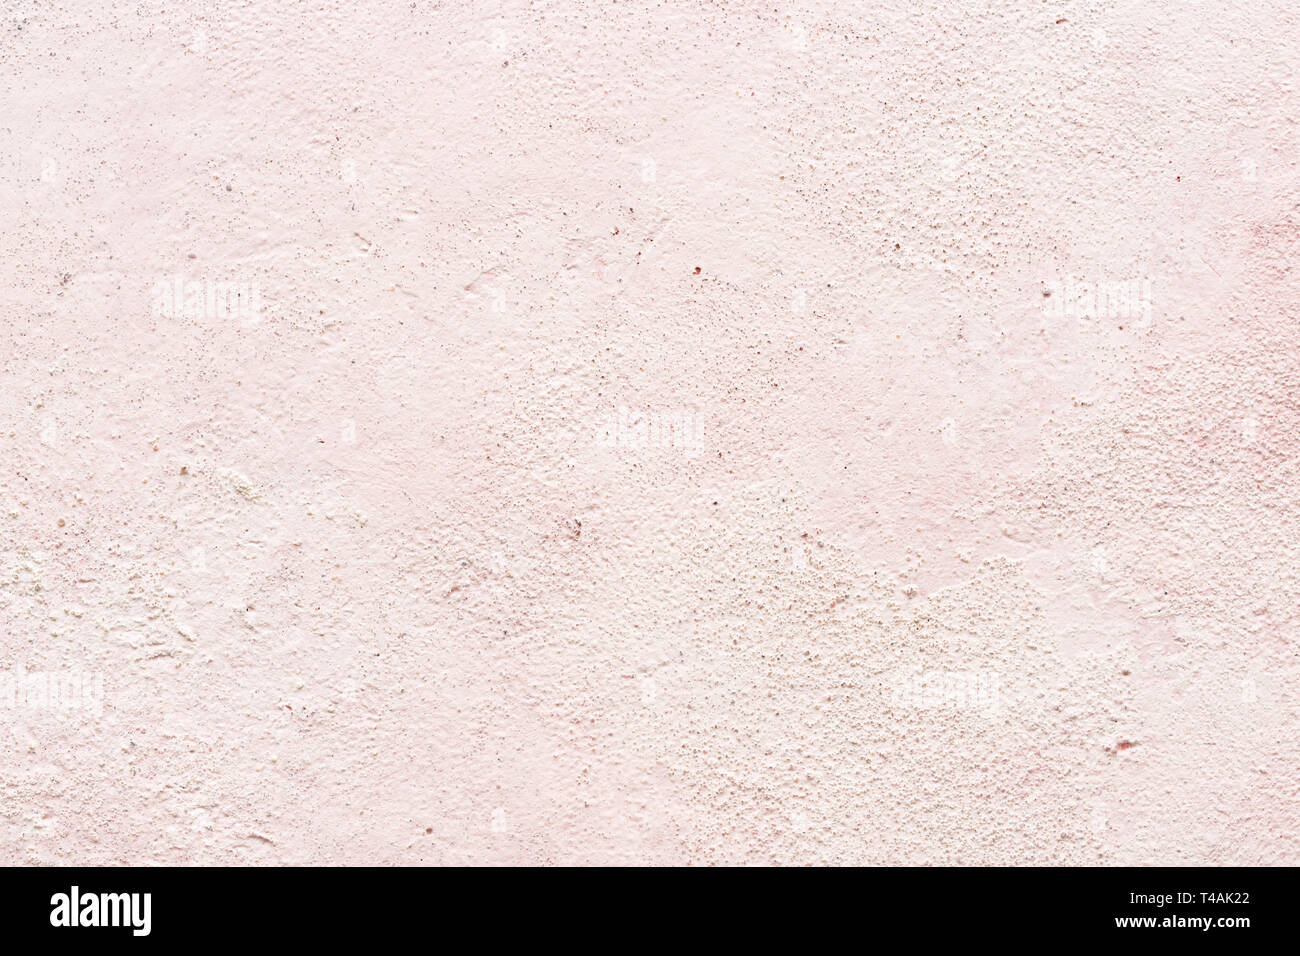 Light pink texture of plaster or stucco wall, close-up. Gentle background, interior decor. Stock Photo